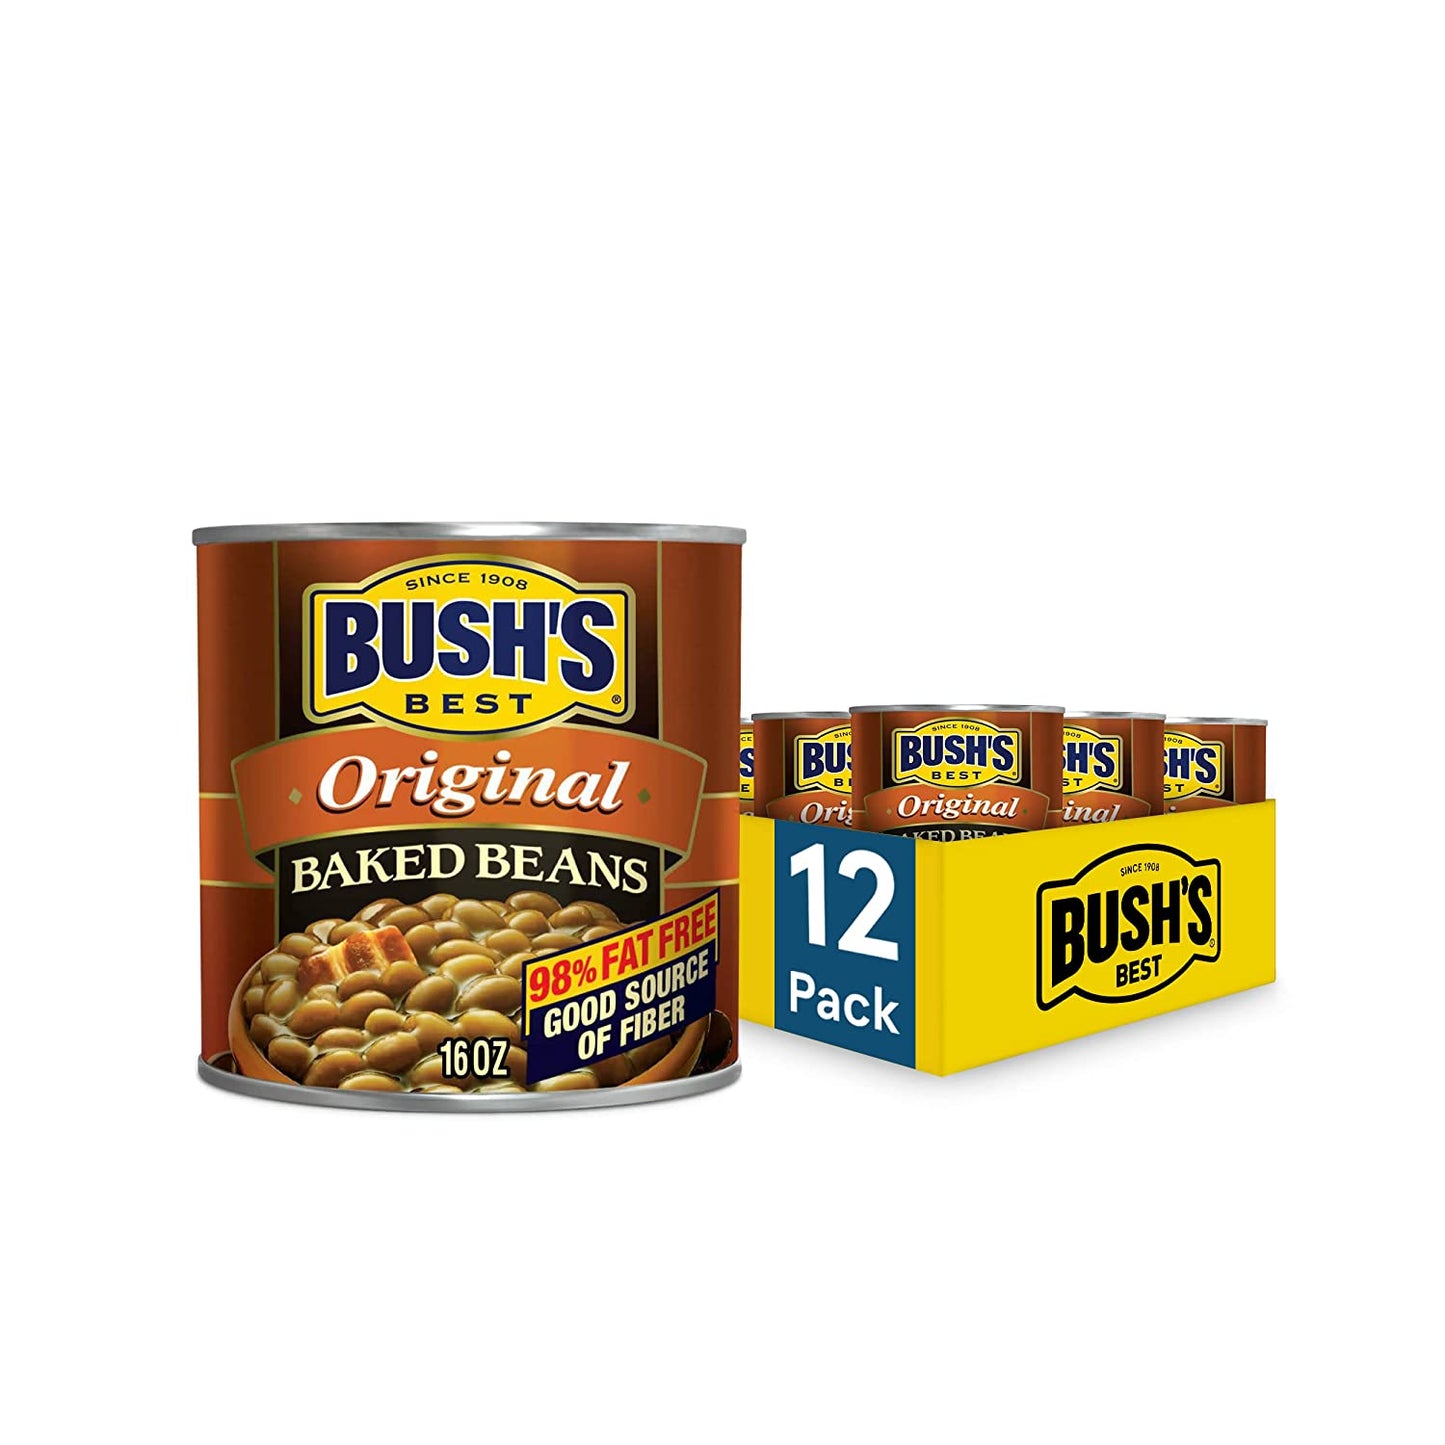 BUSH'S BEST Canned Original Baked Beans (Pack of 12), Source of Plant Based Protein and Fiber, Low Fat, Gluten Free, 16 oz